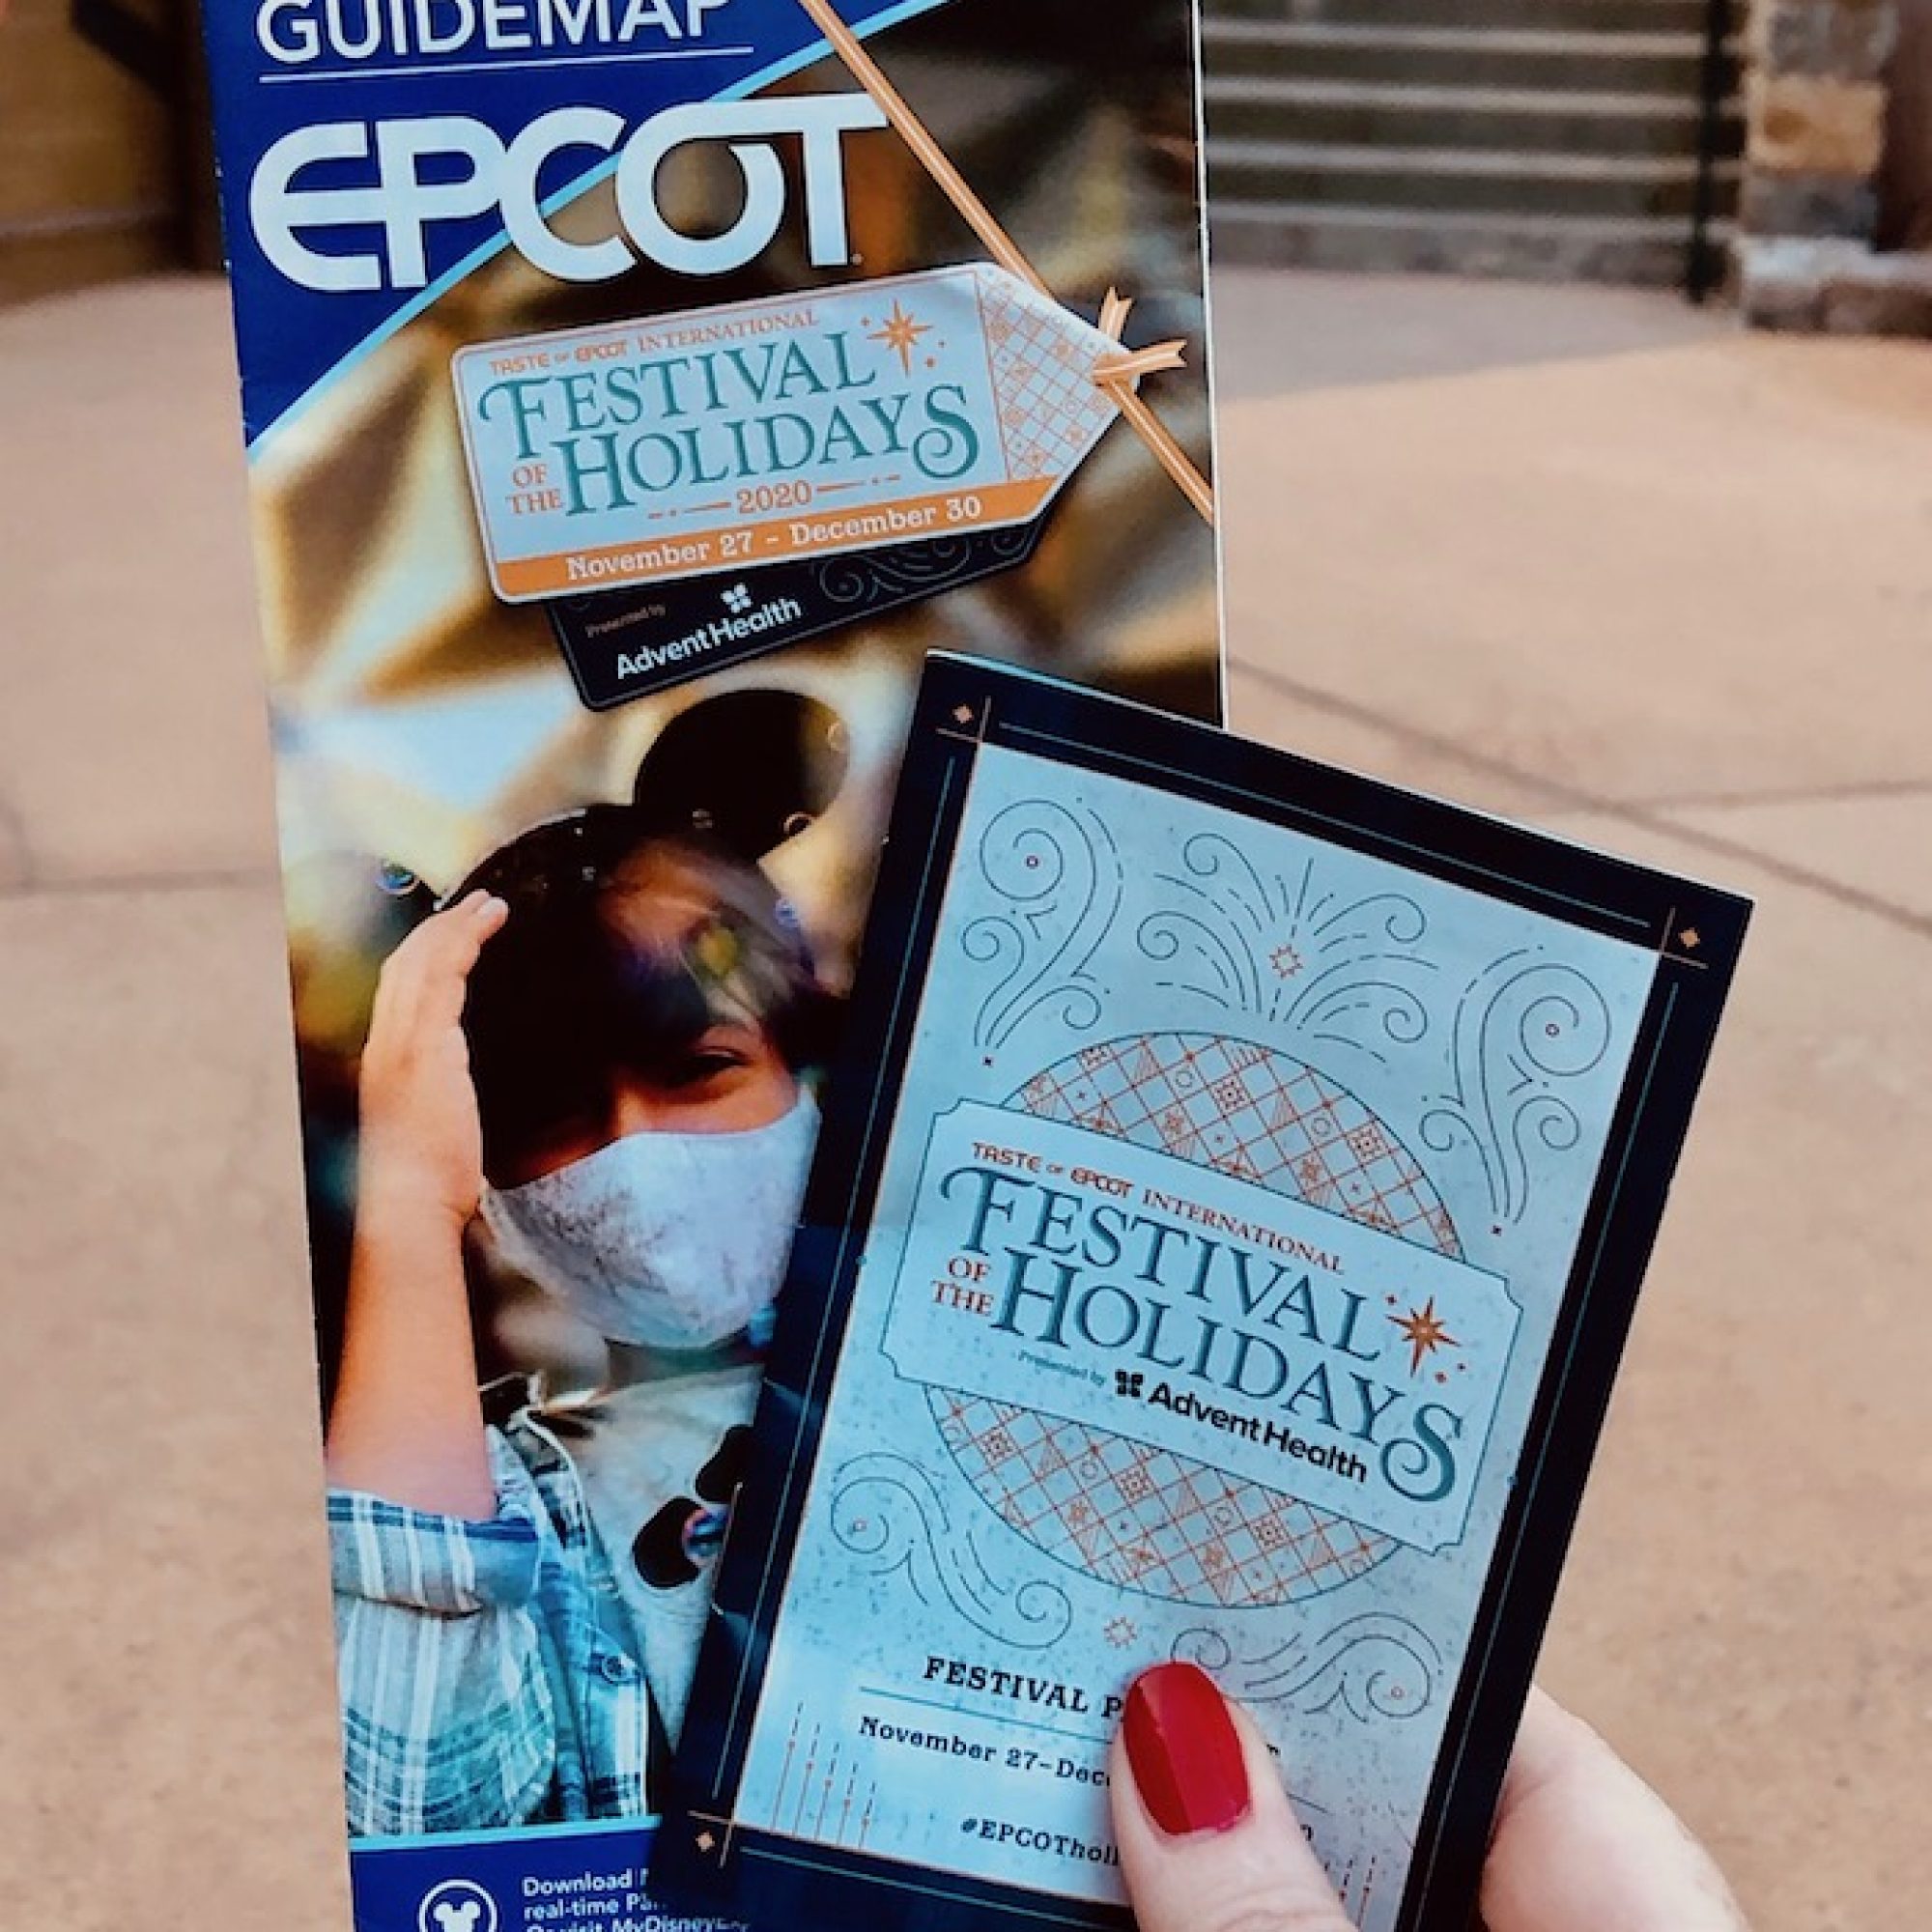 Make sure to pickup an Epcot Park Guide and Festival Passport!